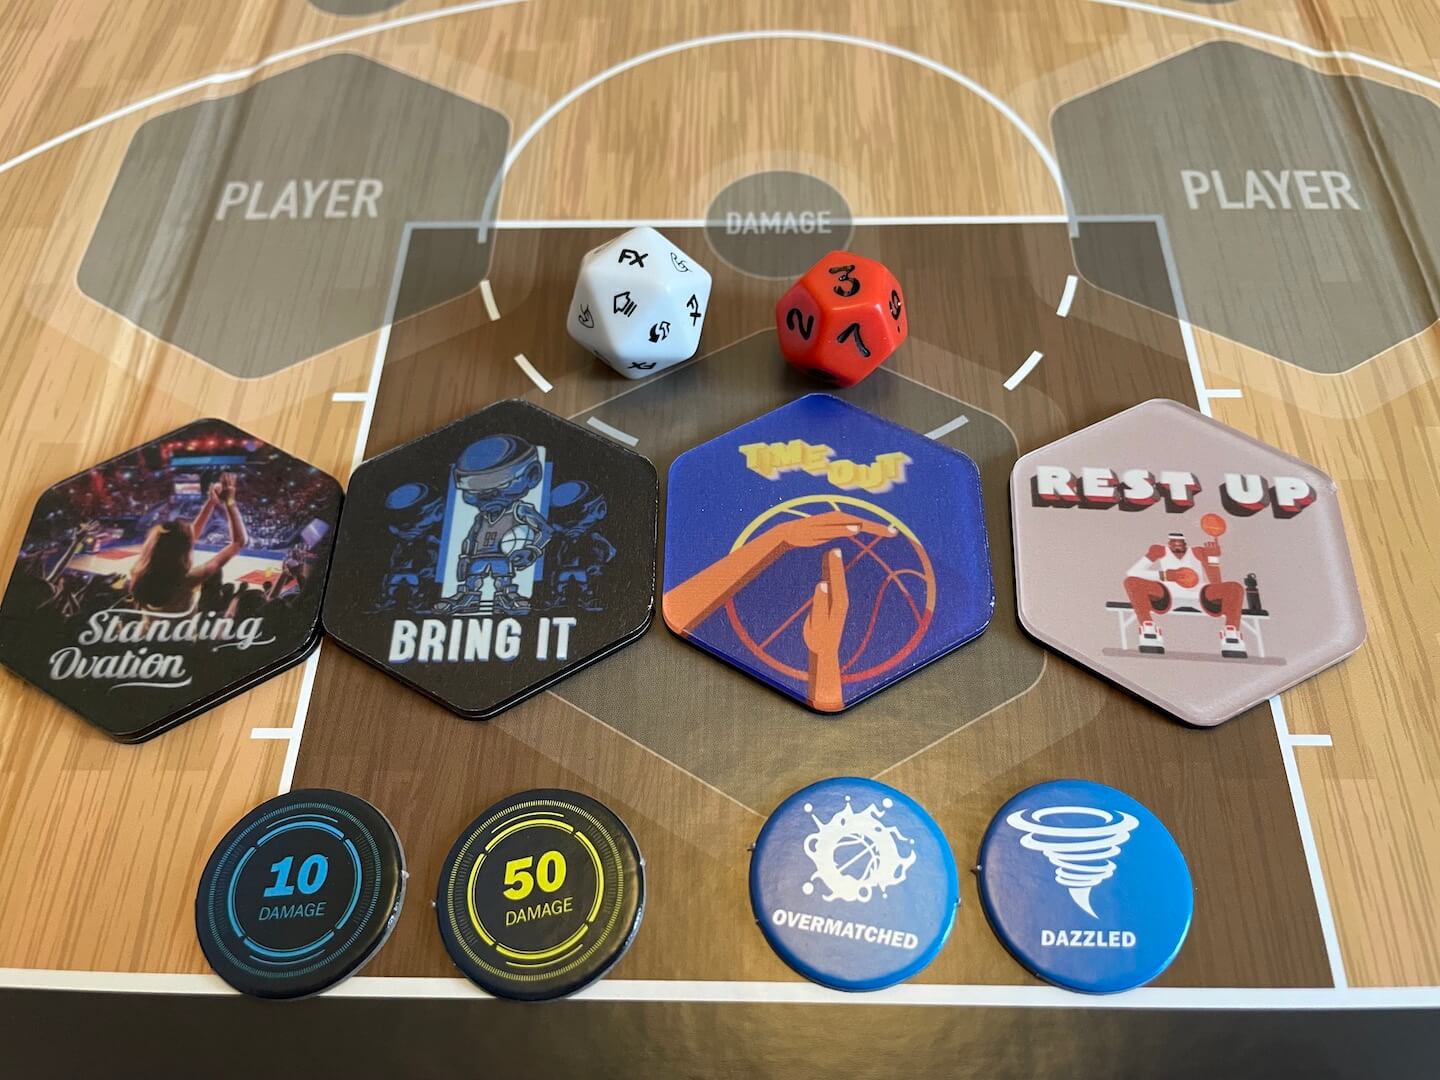 Special tokens and FX Tiles impact the gameplay in FLEX NBA